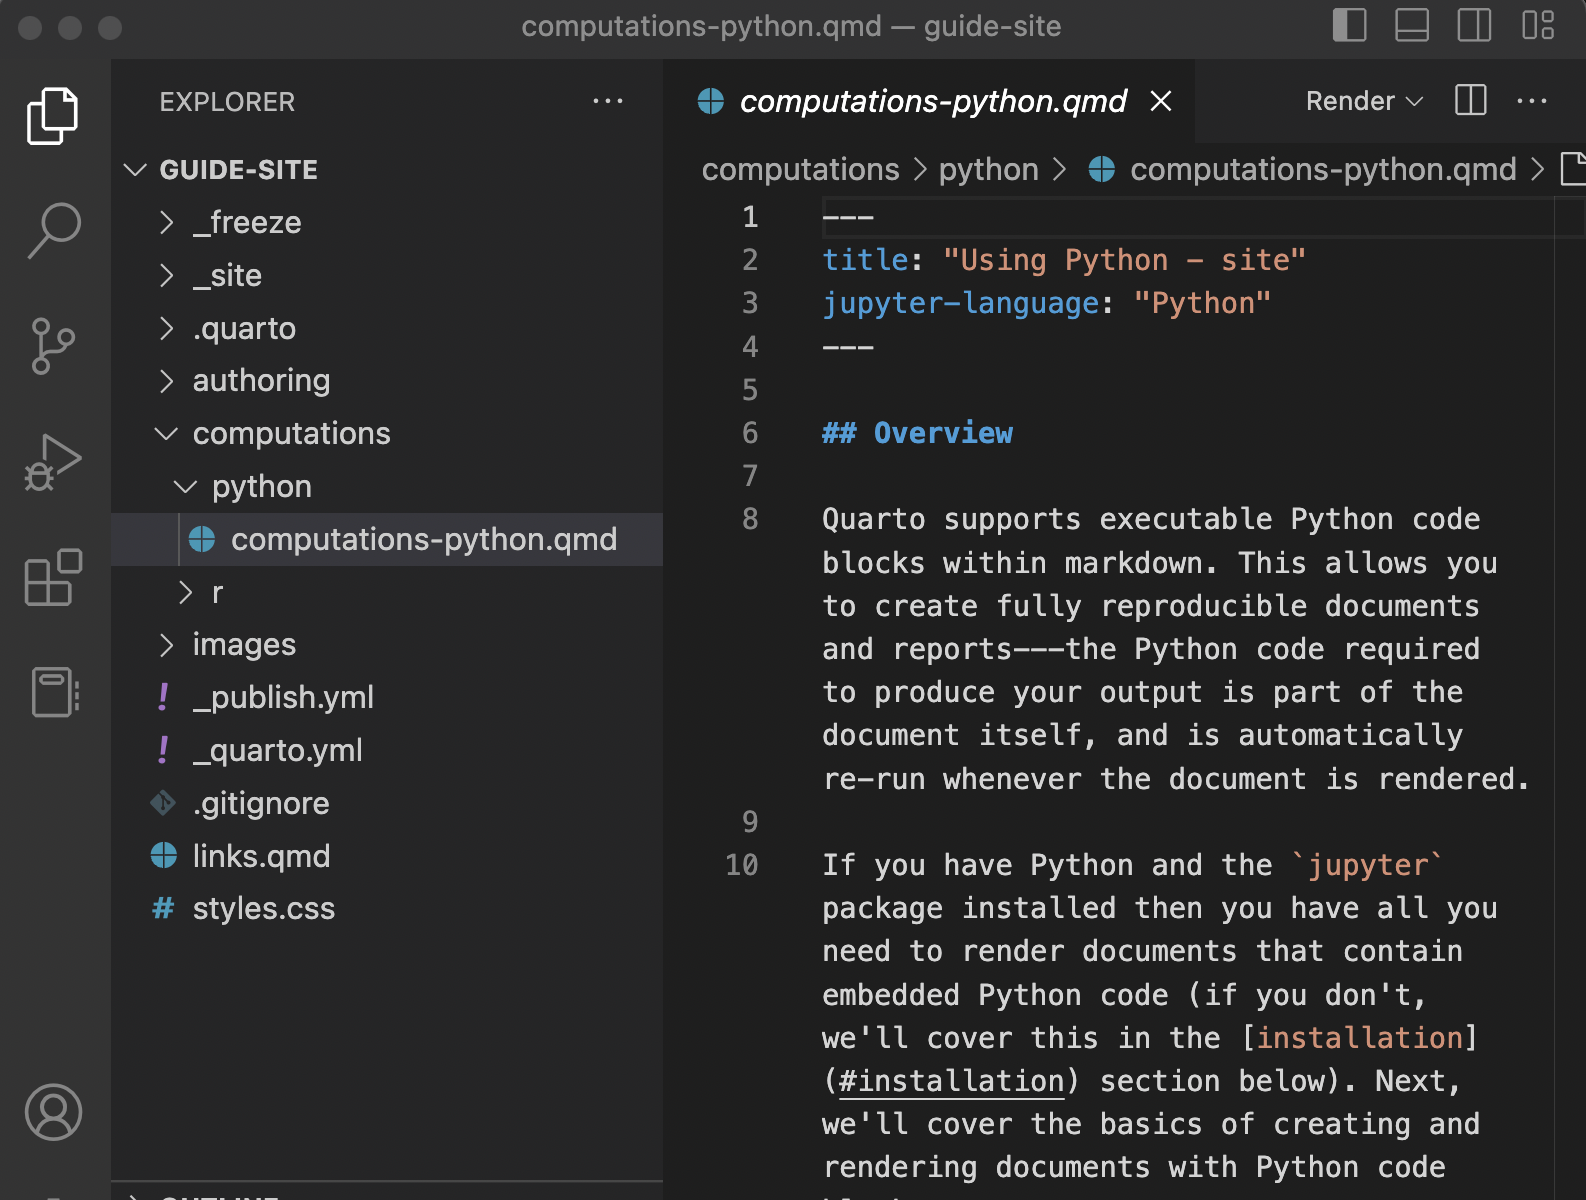 A screenshot of a Quarto project in VS Code. On the left in the Explorer, the project folder is called 'Guide-site', and contains folders 'authoring', and 'computation', along with some other files. A document from the folder 'python' inside the folder 'computations' with the title 'Using Python - site' is open in the Source Pane. 